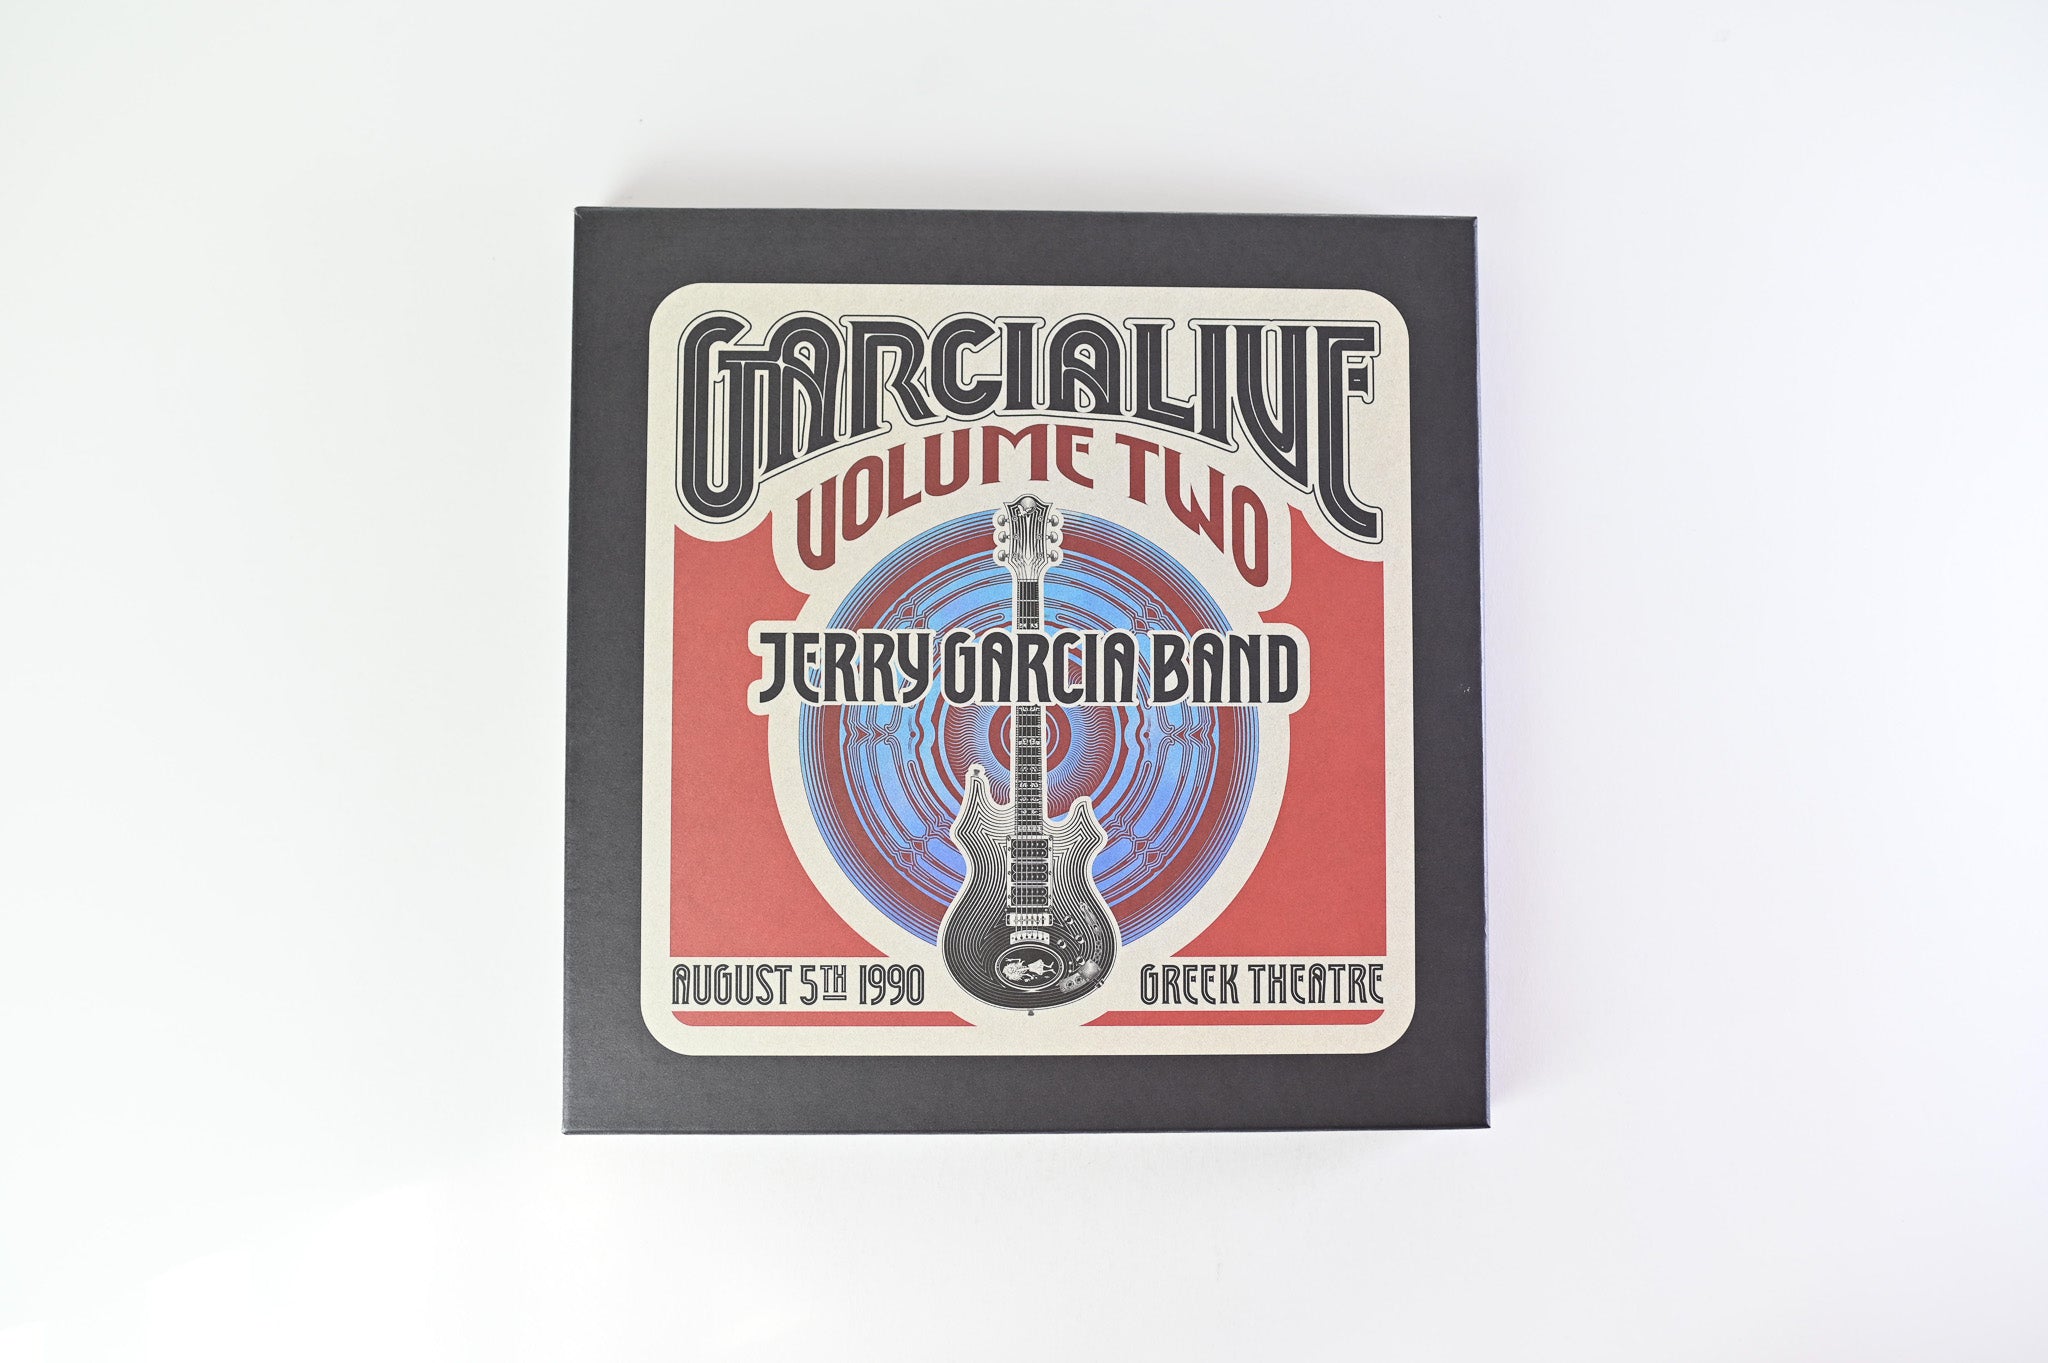 The Jerry Garcia Band - GarciaLive Volume Two (August 5th 1990 Greek Theatre) on Round RSD BF 2020 Ltd Box Set Reissue